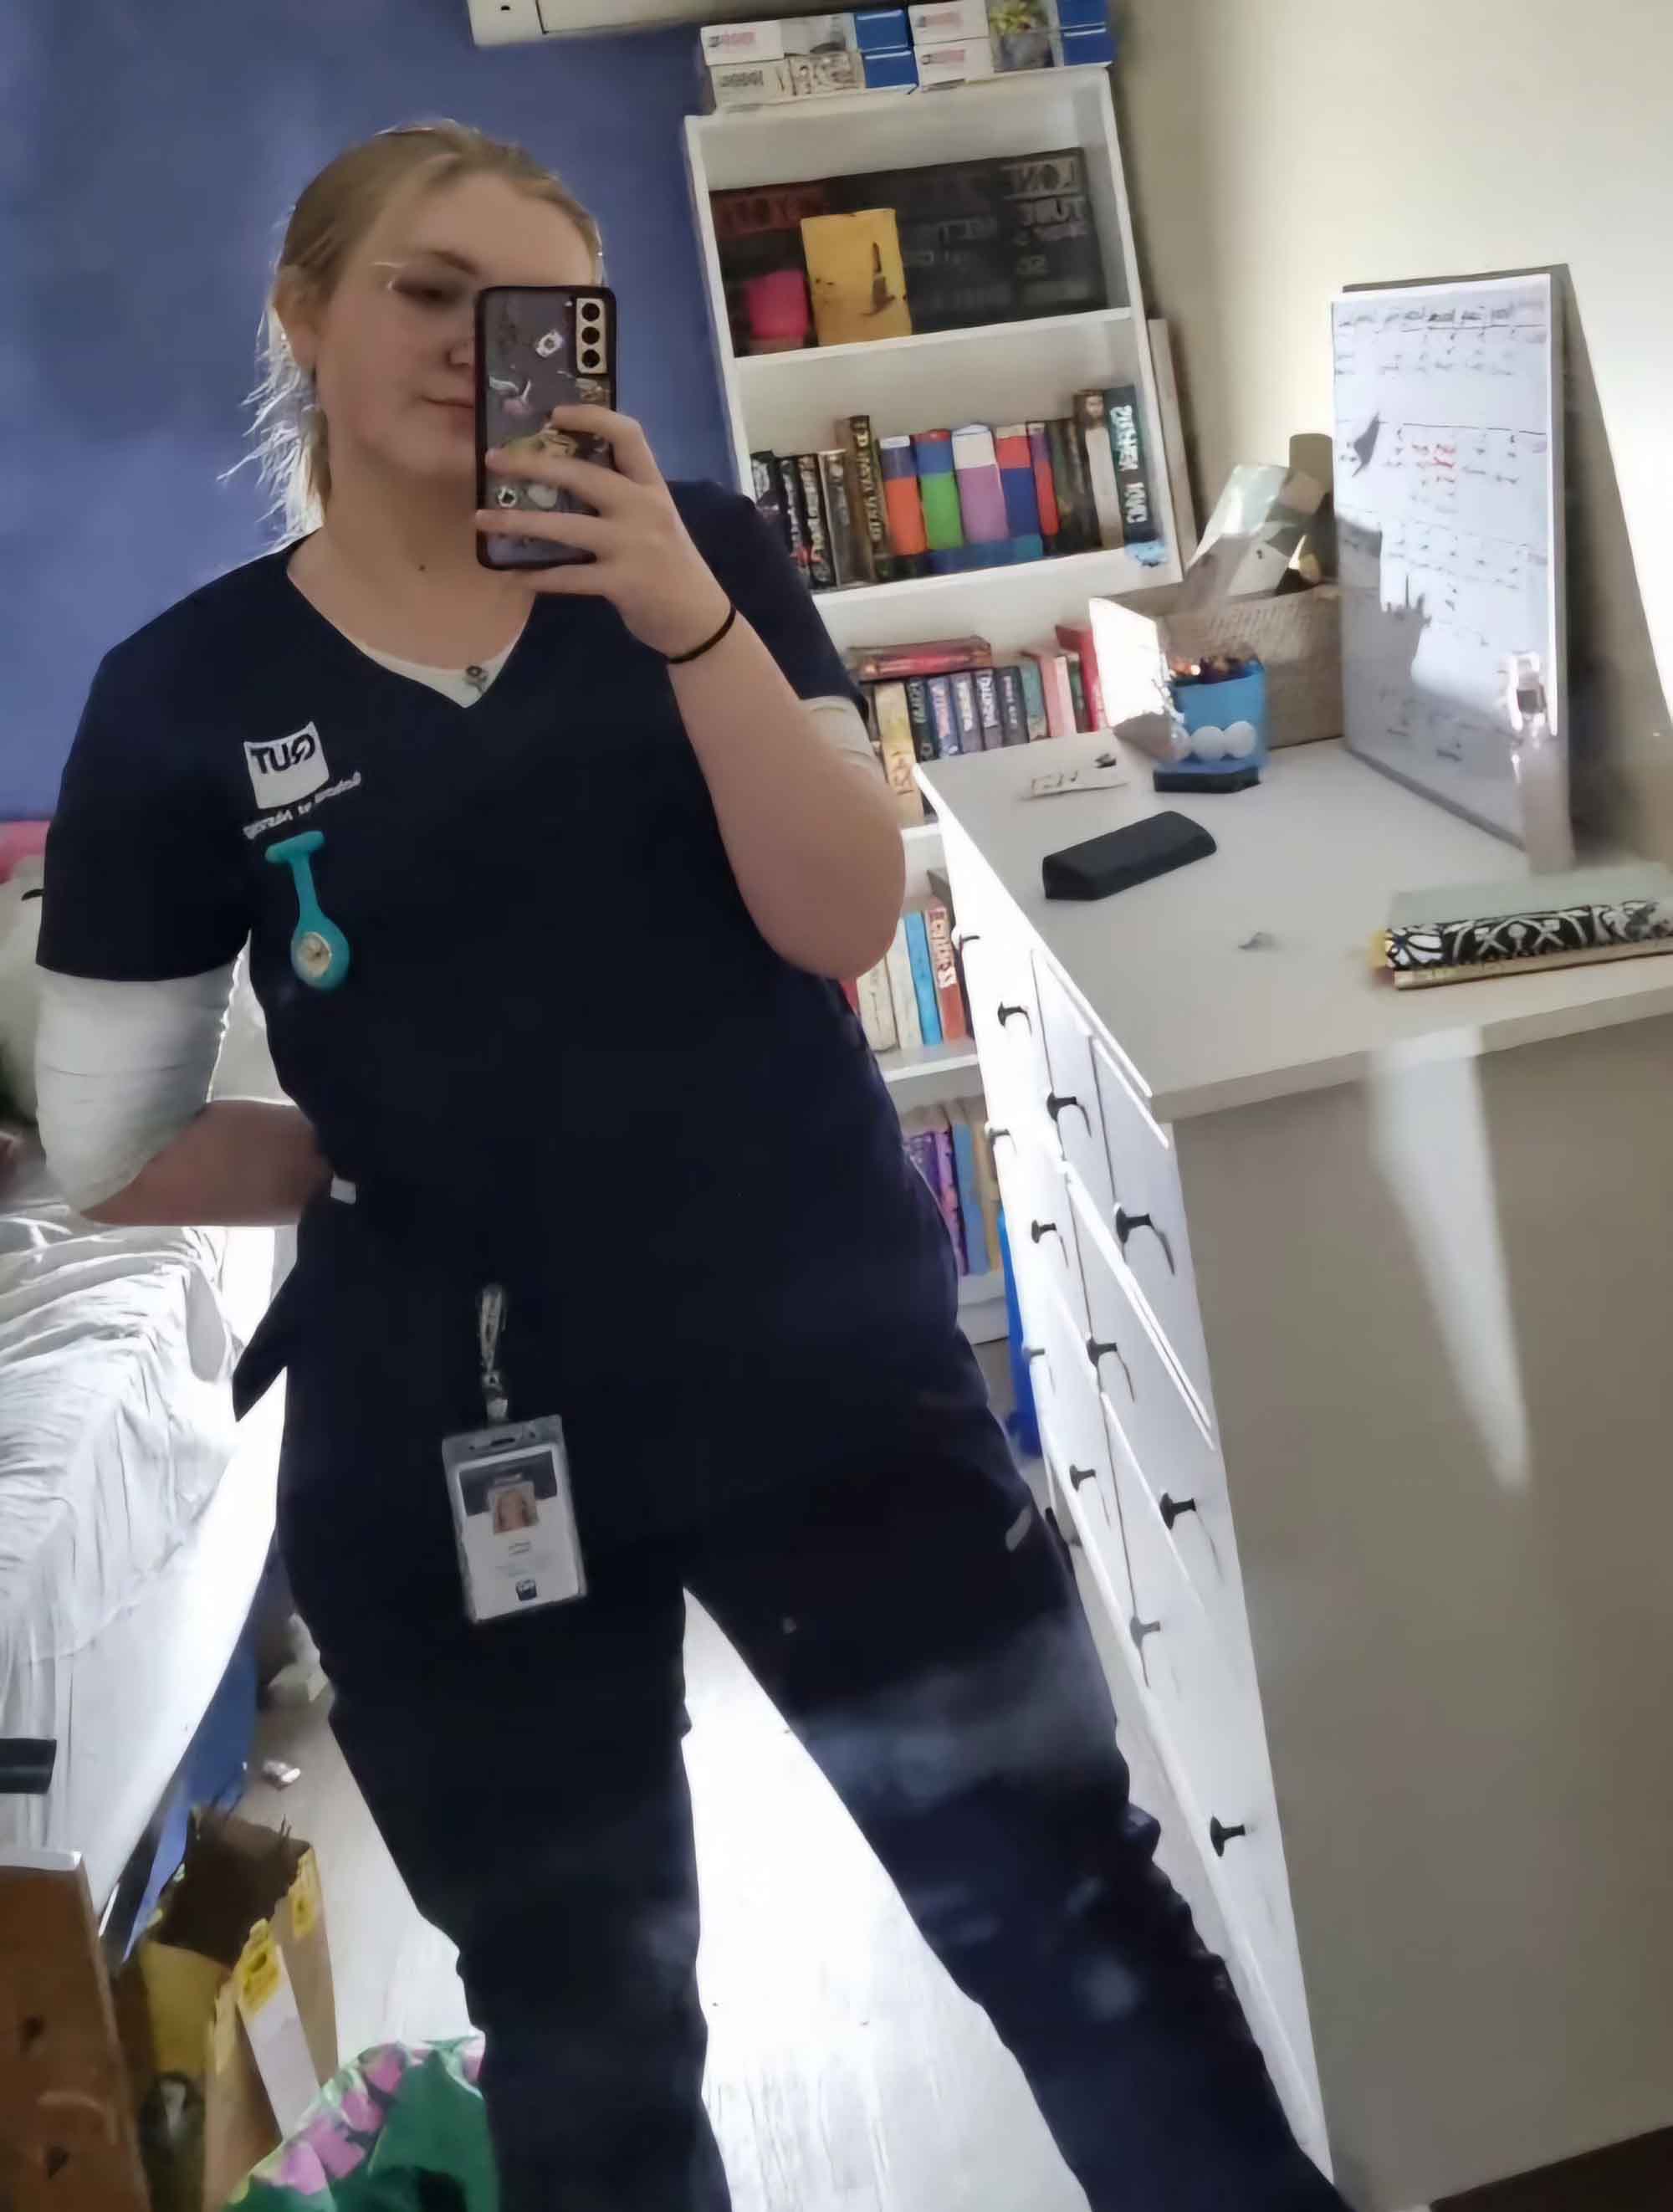 A female student wearing blue hospital scrubs photographs herself in a mirror before heading out on placement.